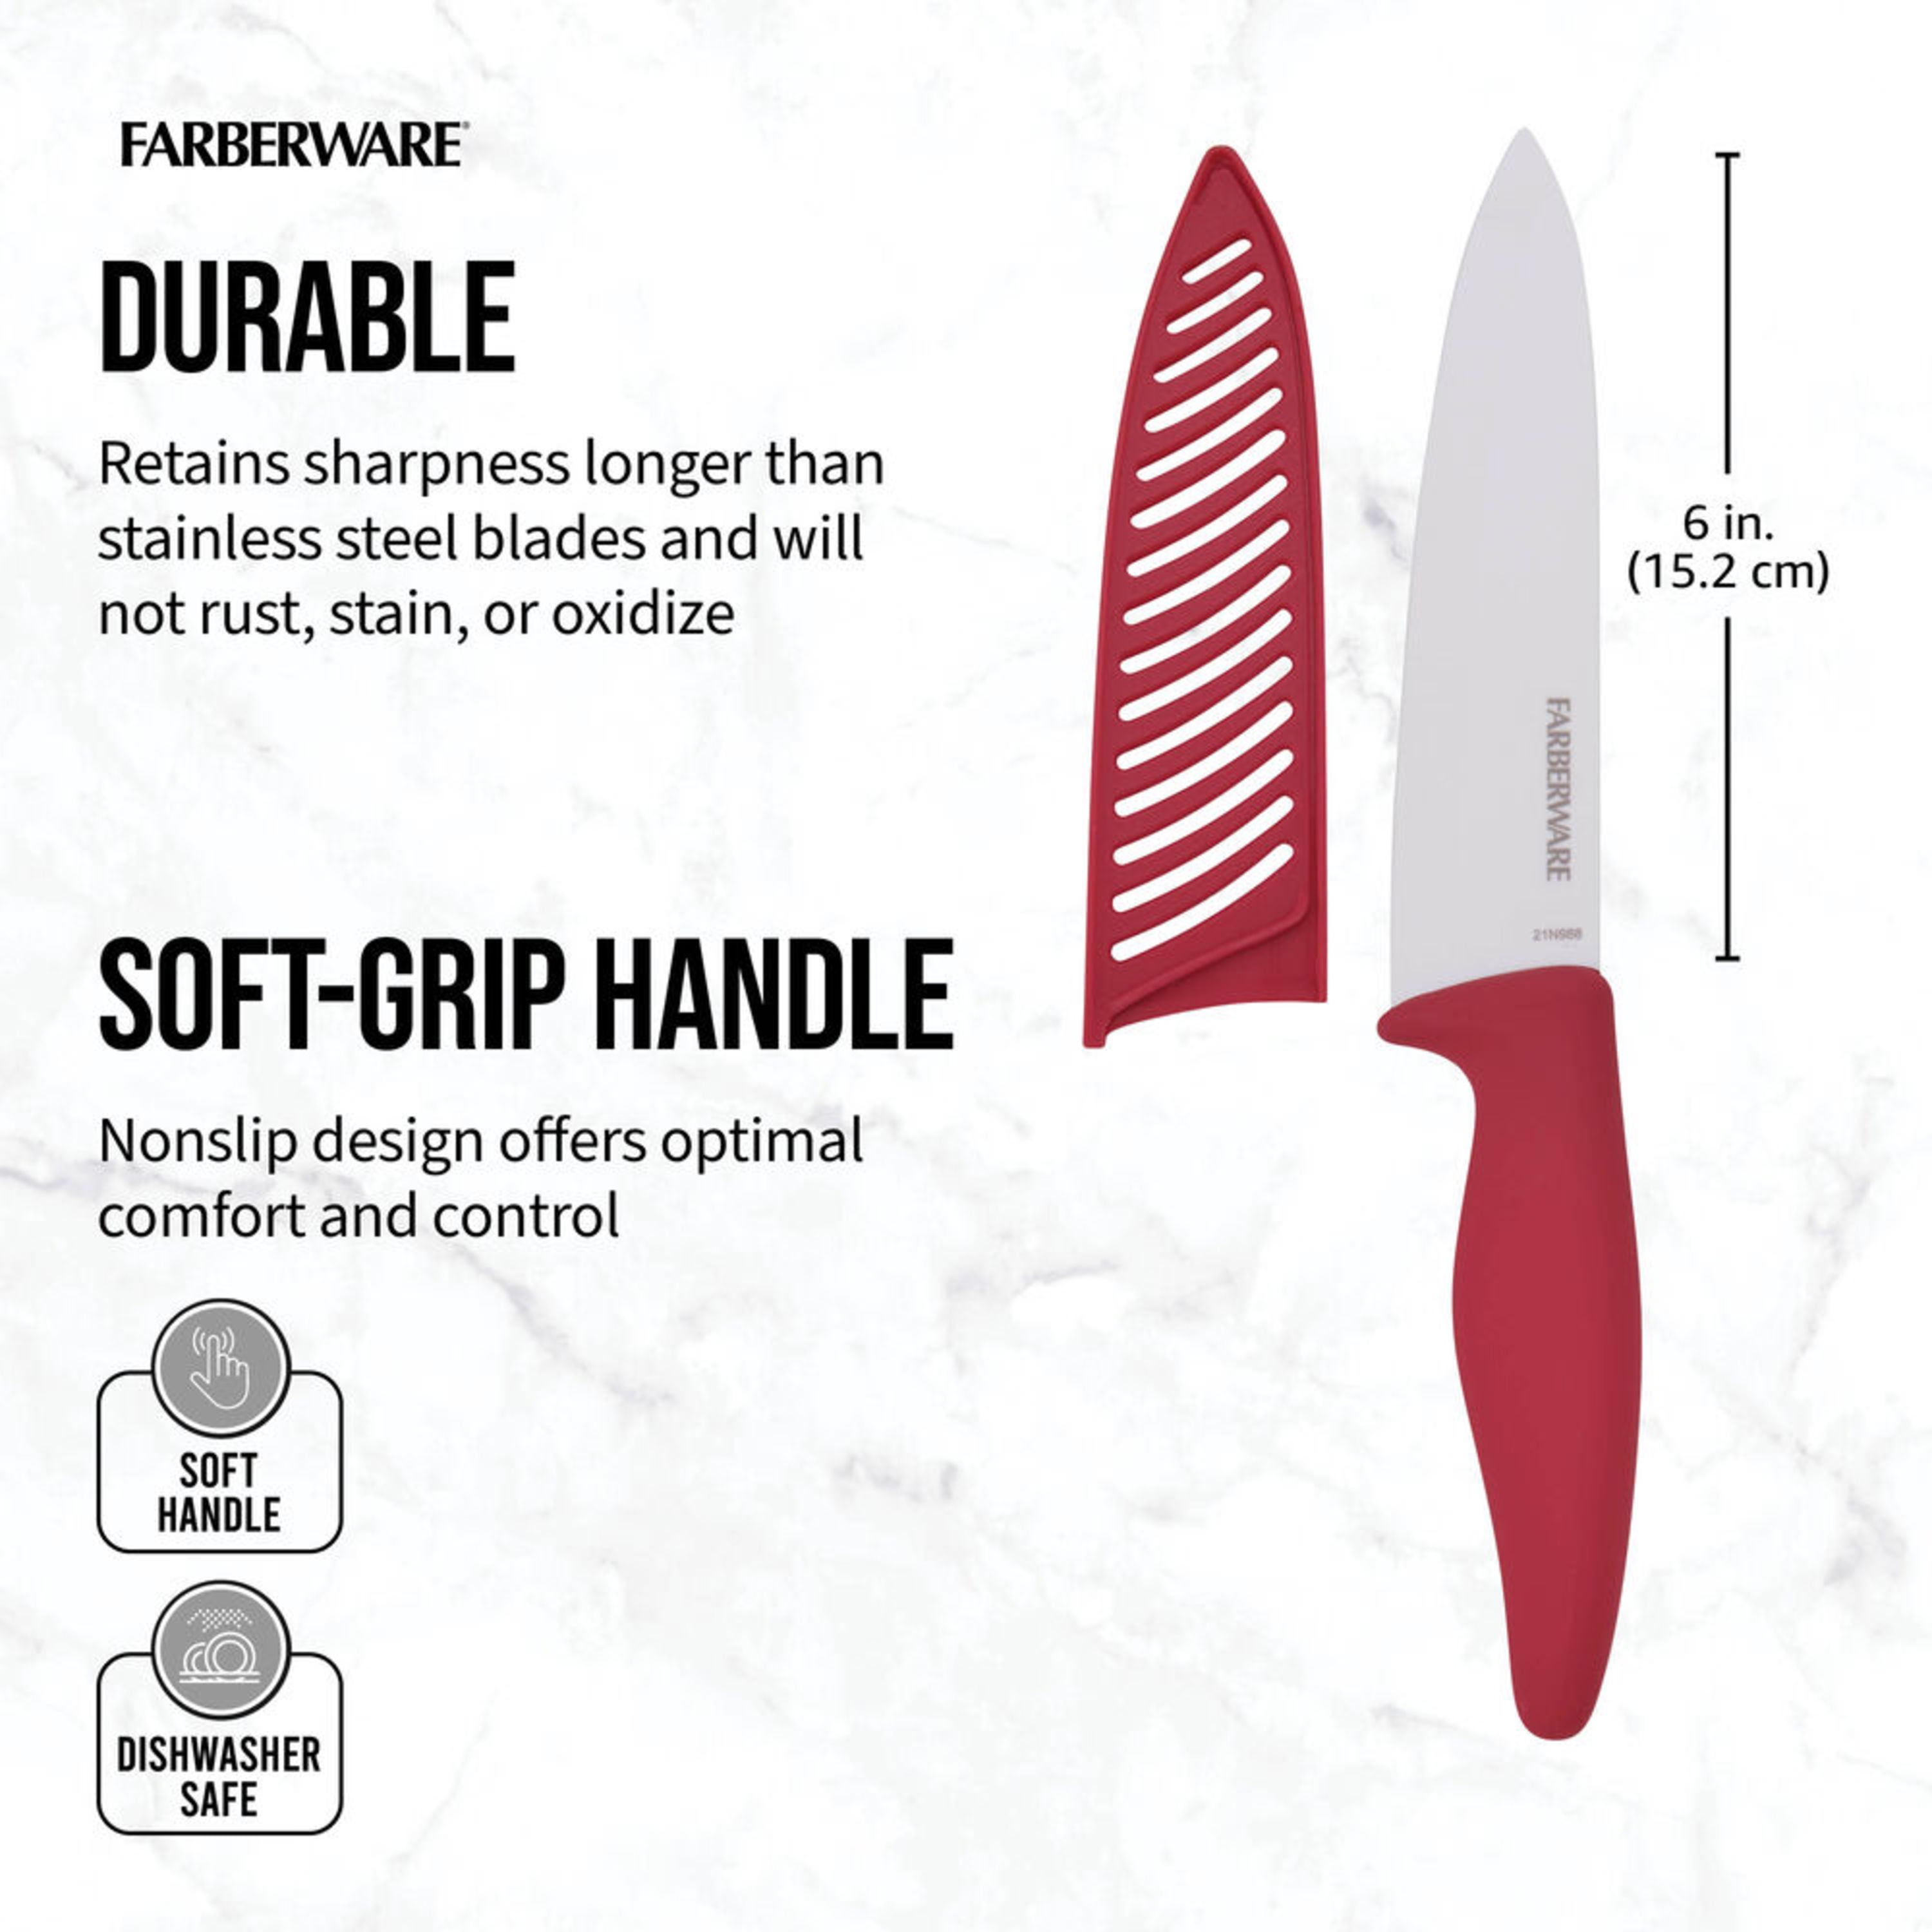 Ceramic Knives Set with Covers - 6 Pcs - Red